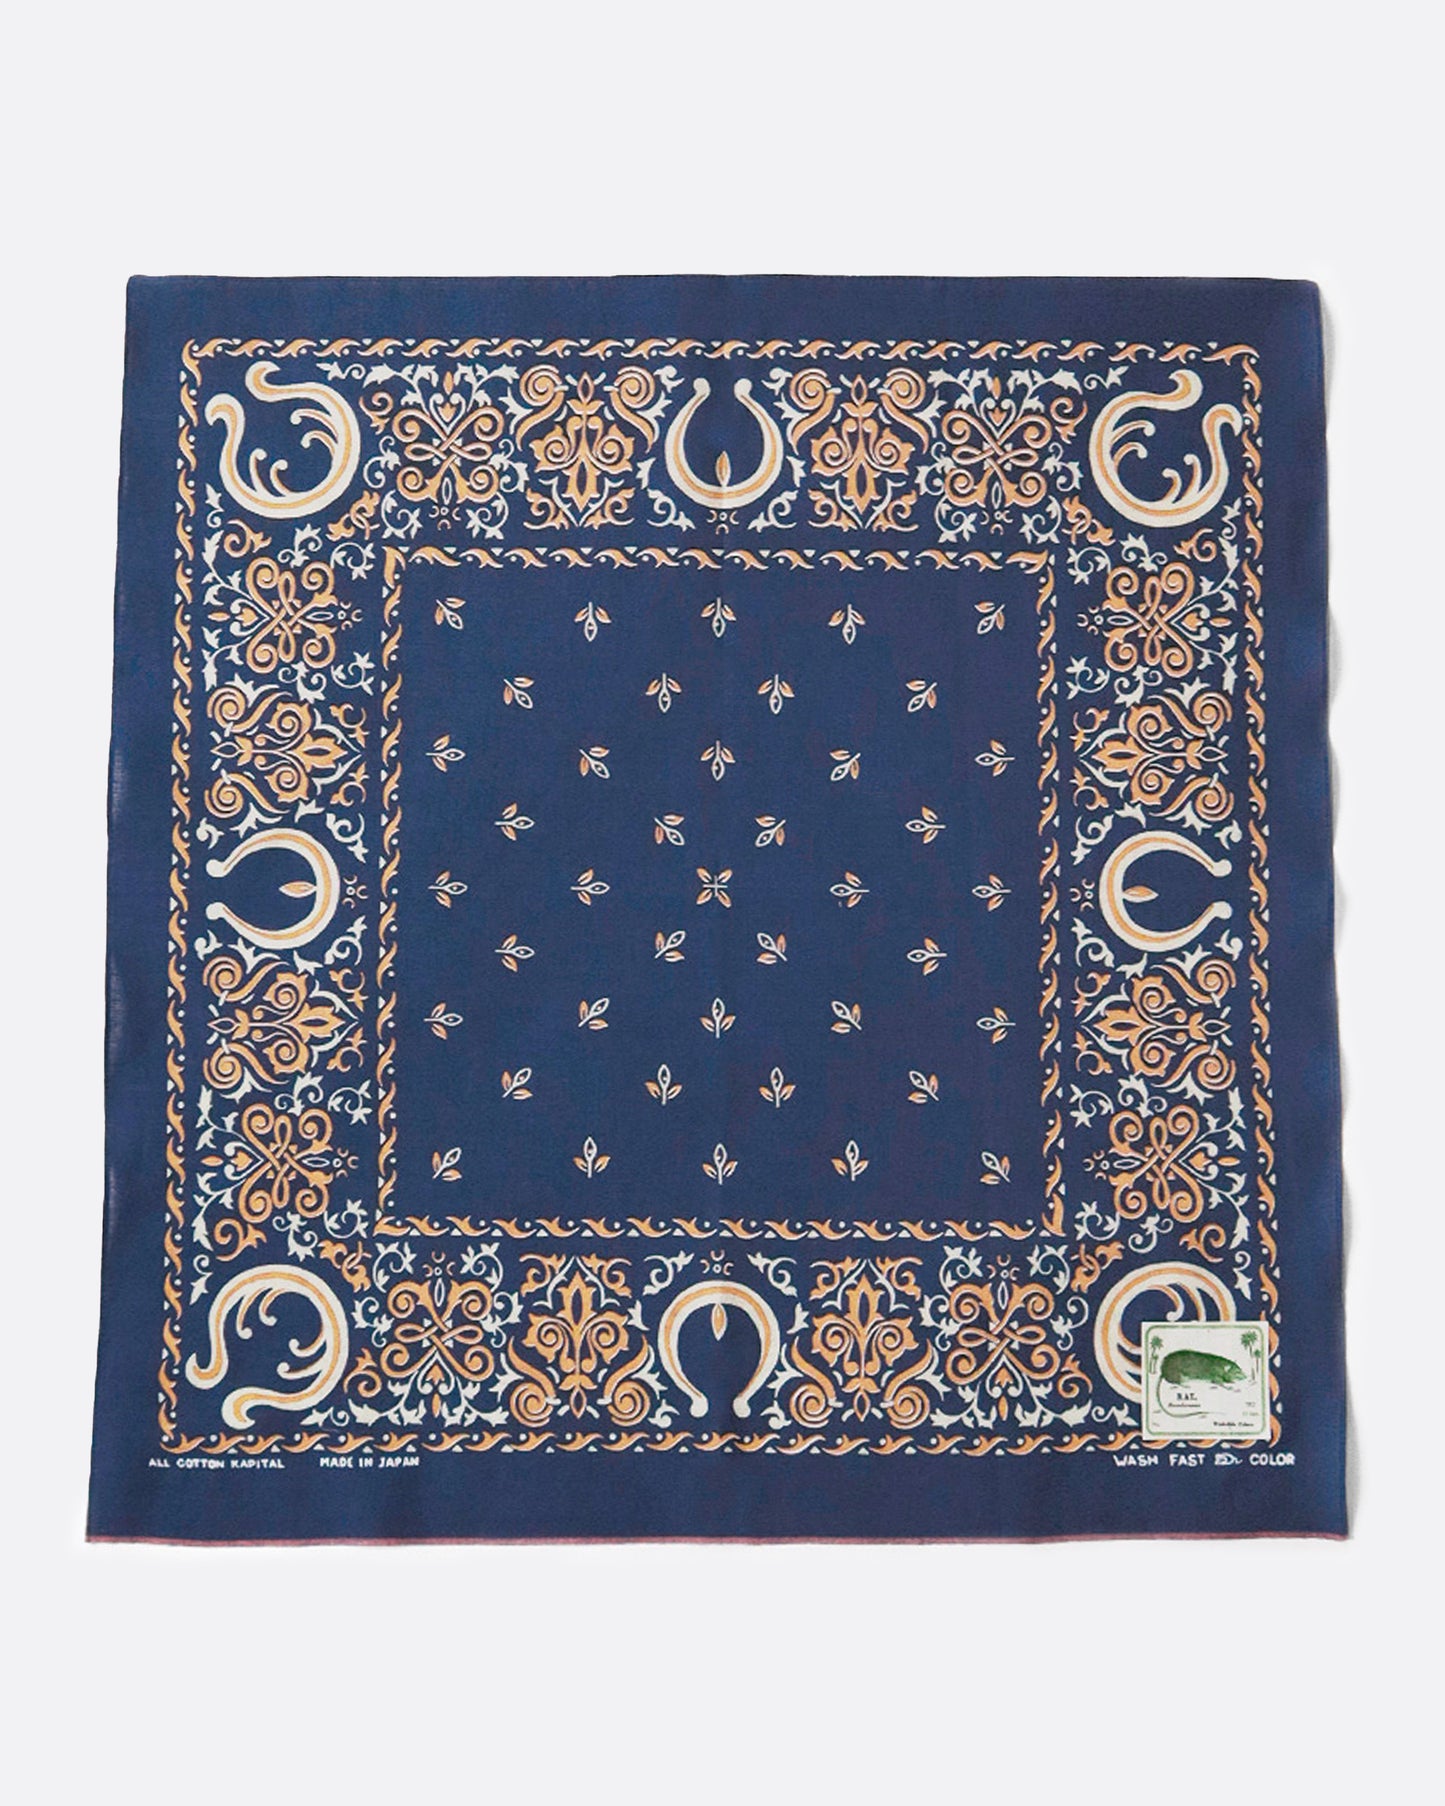 Printed with Native American najas, both traditional and those composed of antlers, this fastcolor selvedge bandana celebrates strength and creation.